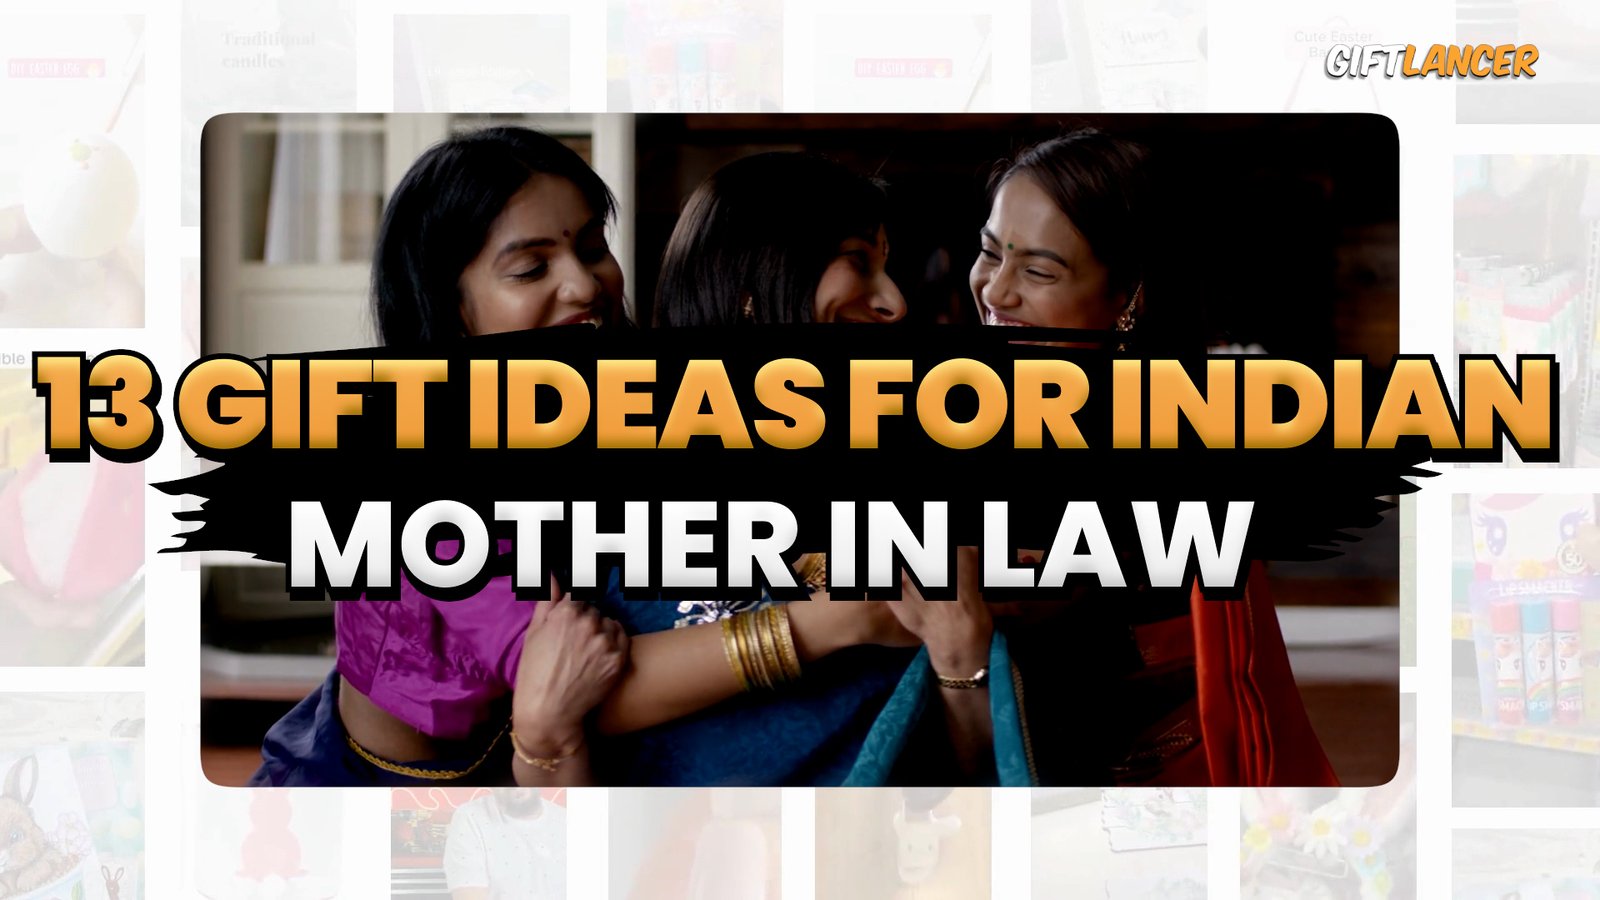 12+ Gift Ideas That Would Leave Your Indian Mother In Law Wanting More